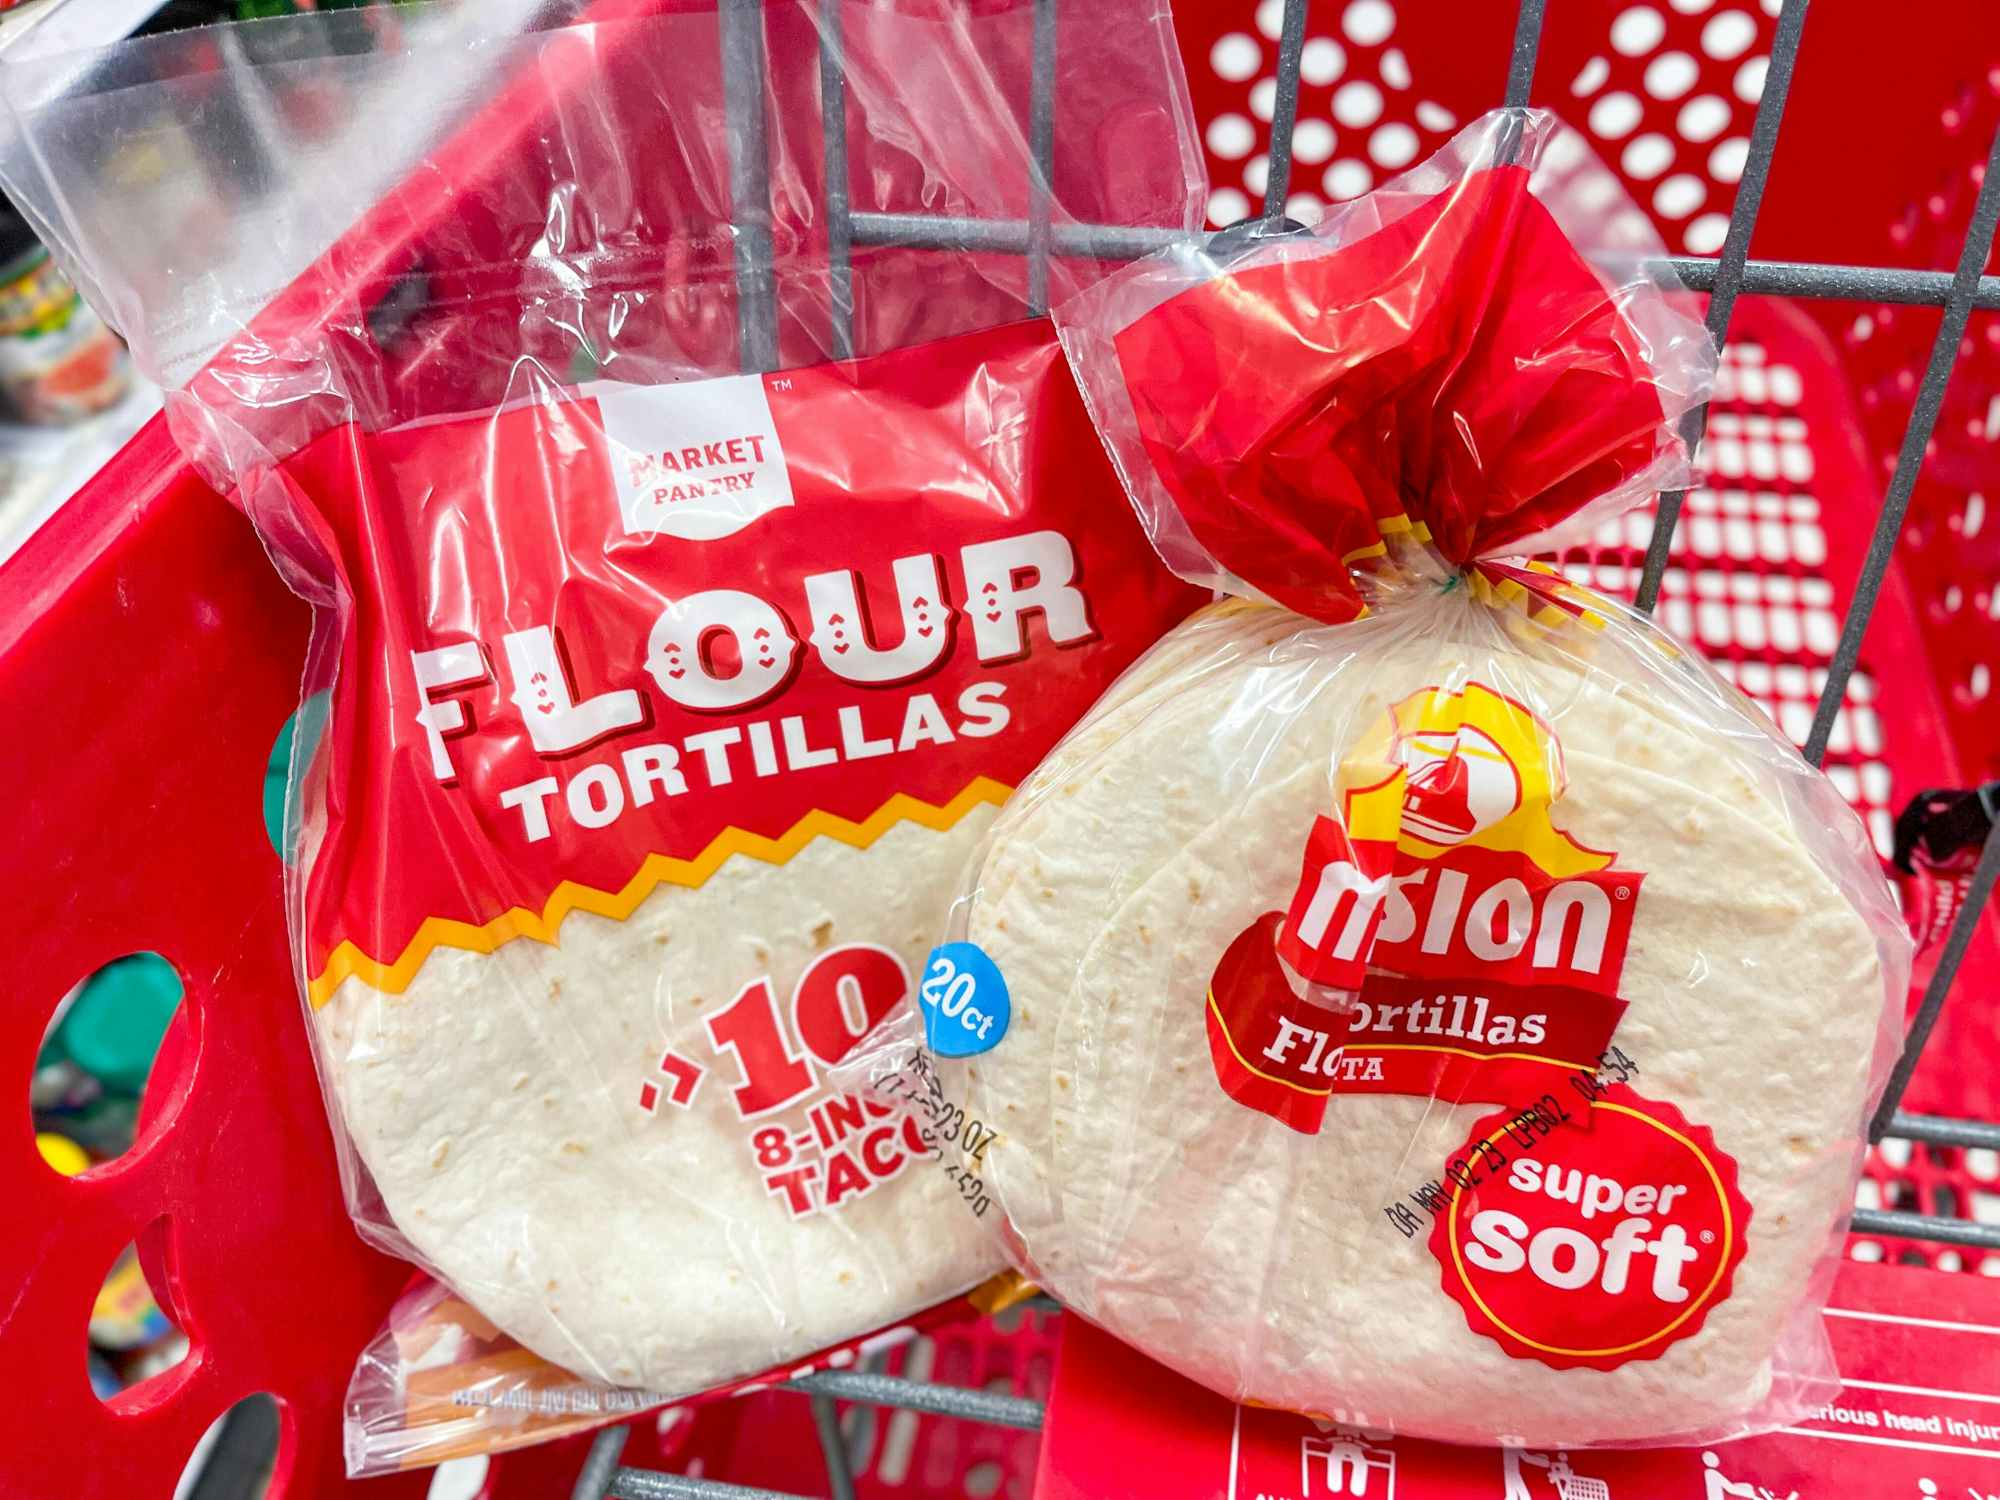 Some Market Pantry flour tortillas next to some Mission tortillas in a Target shopping cart